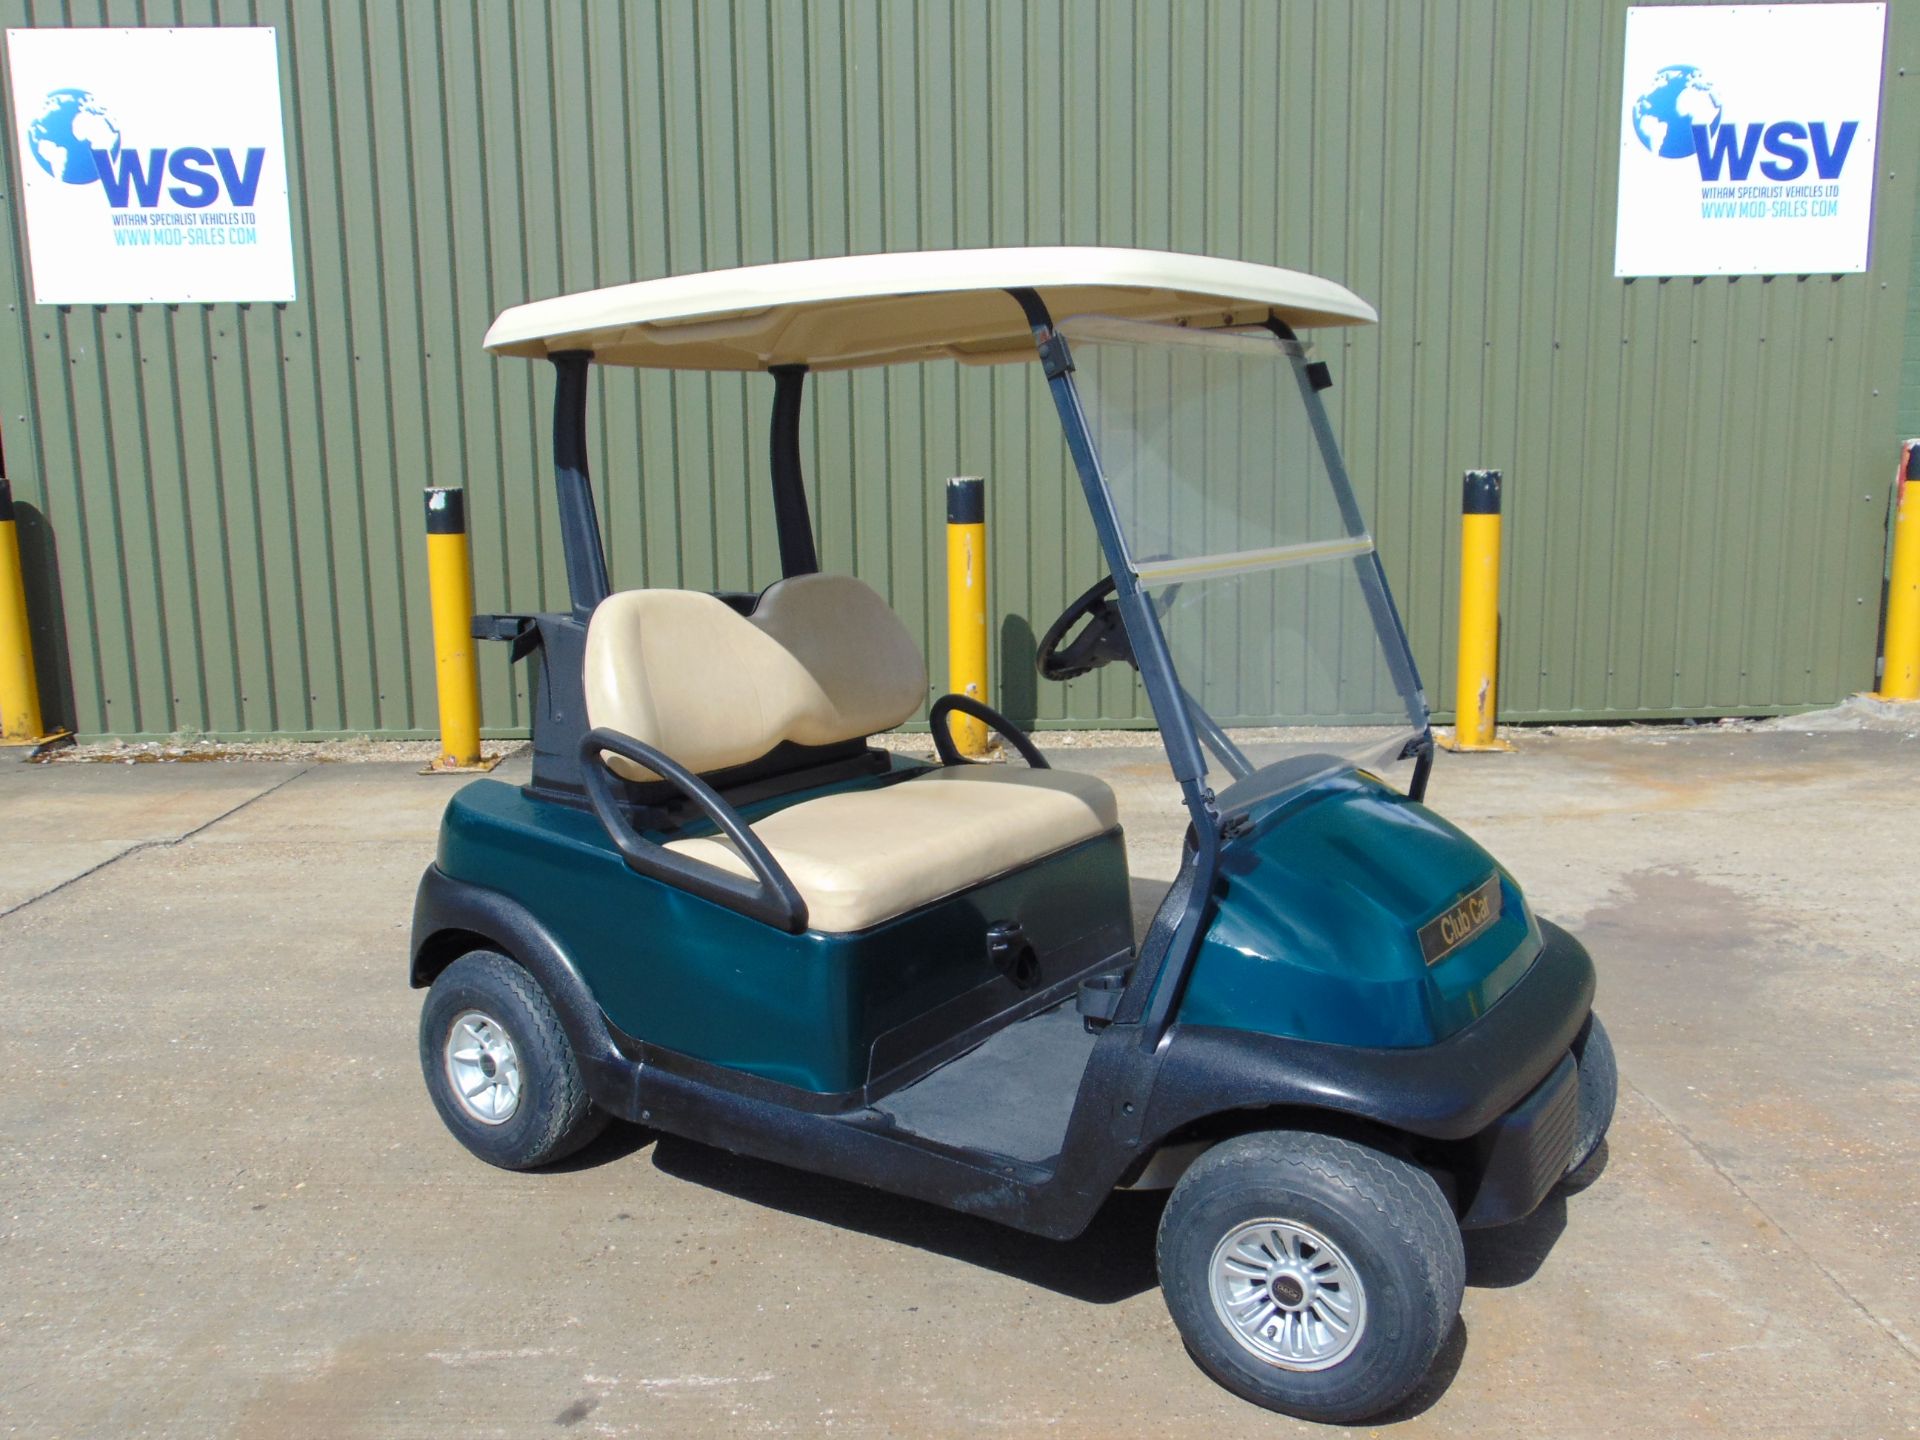 Club Car Precedent Electric Golf Buggy C/W Battery Charger